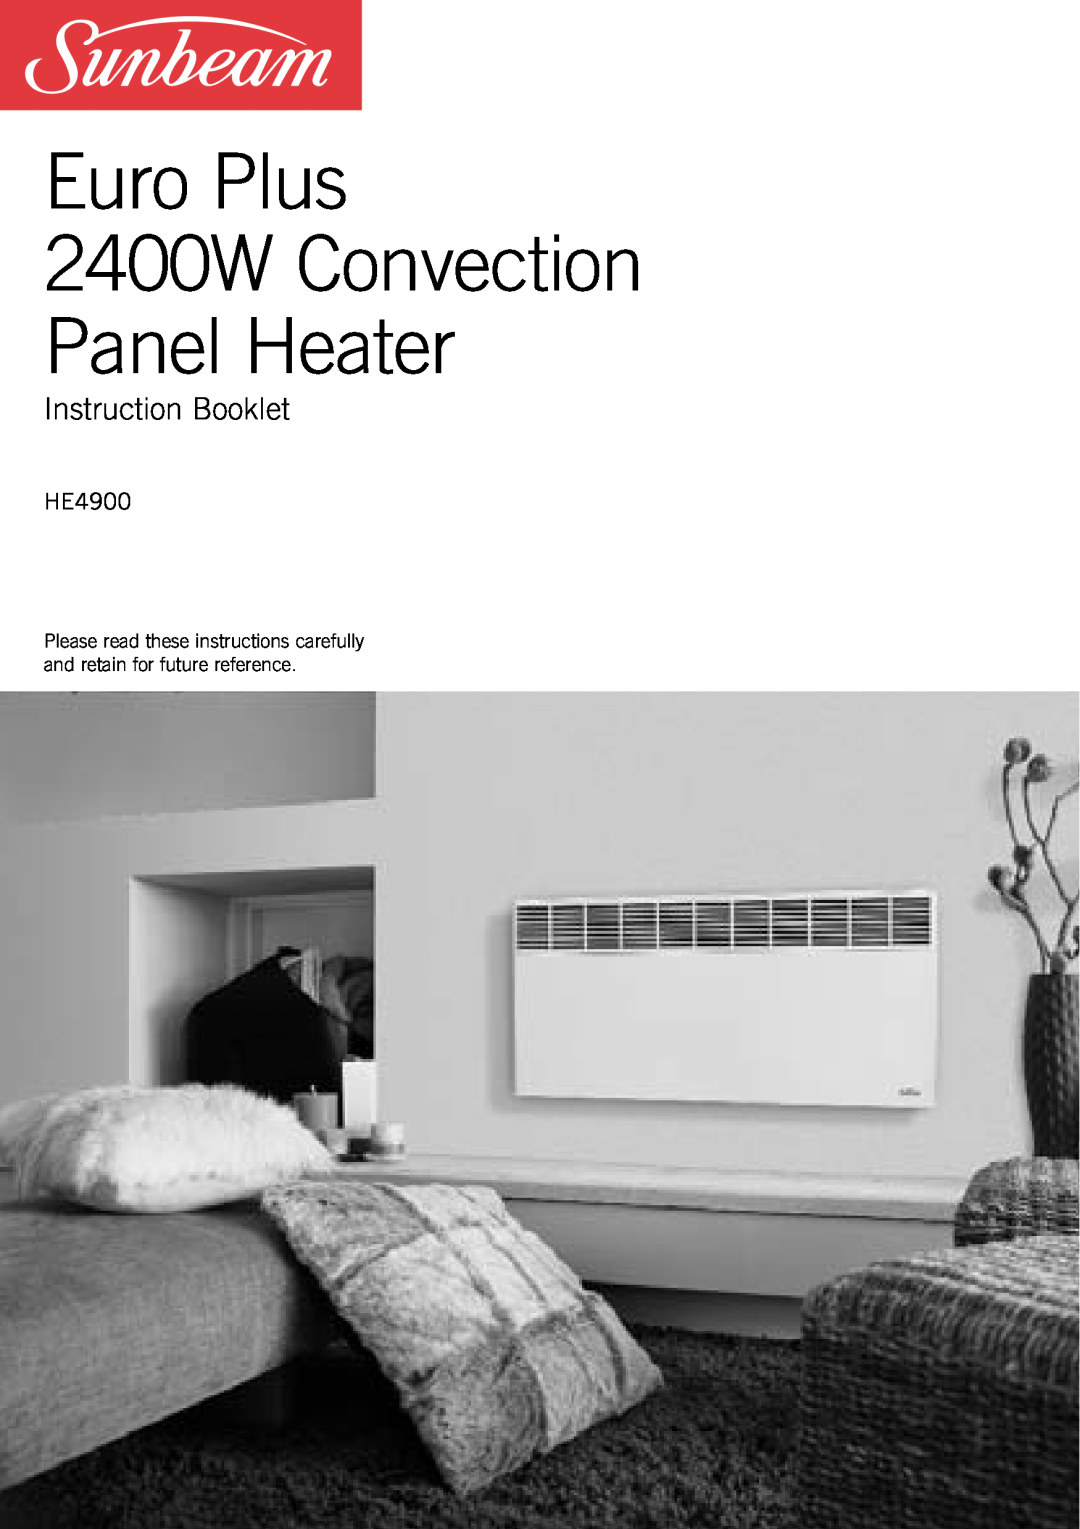 Sunbeam HE4900 manual Instruction Booklet, Euro Plus 2400W Convection Panel Heater 